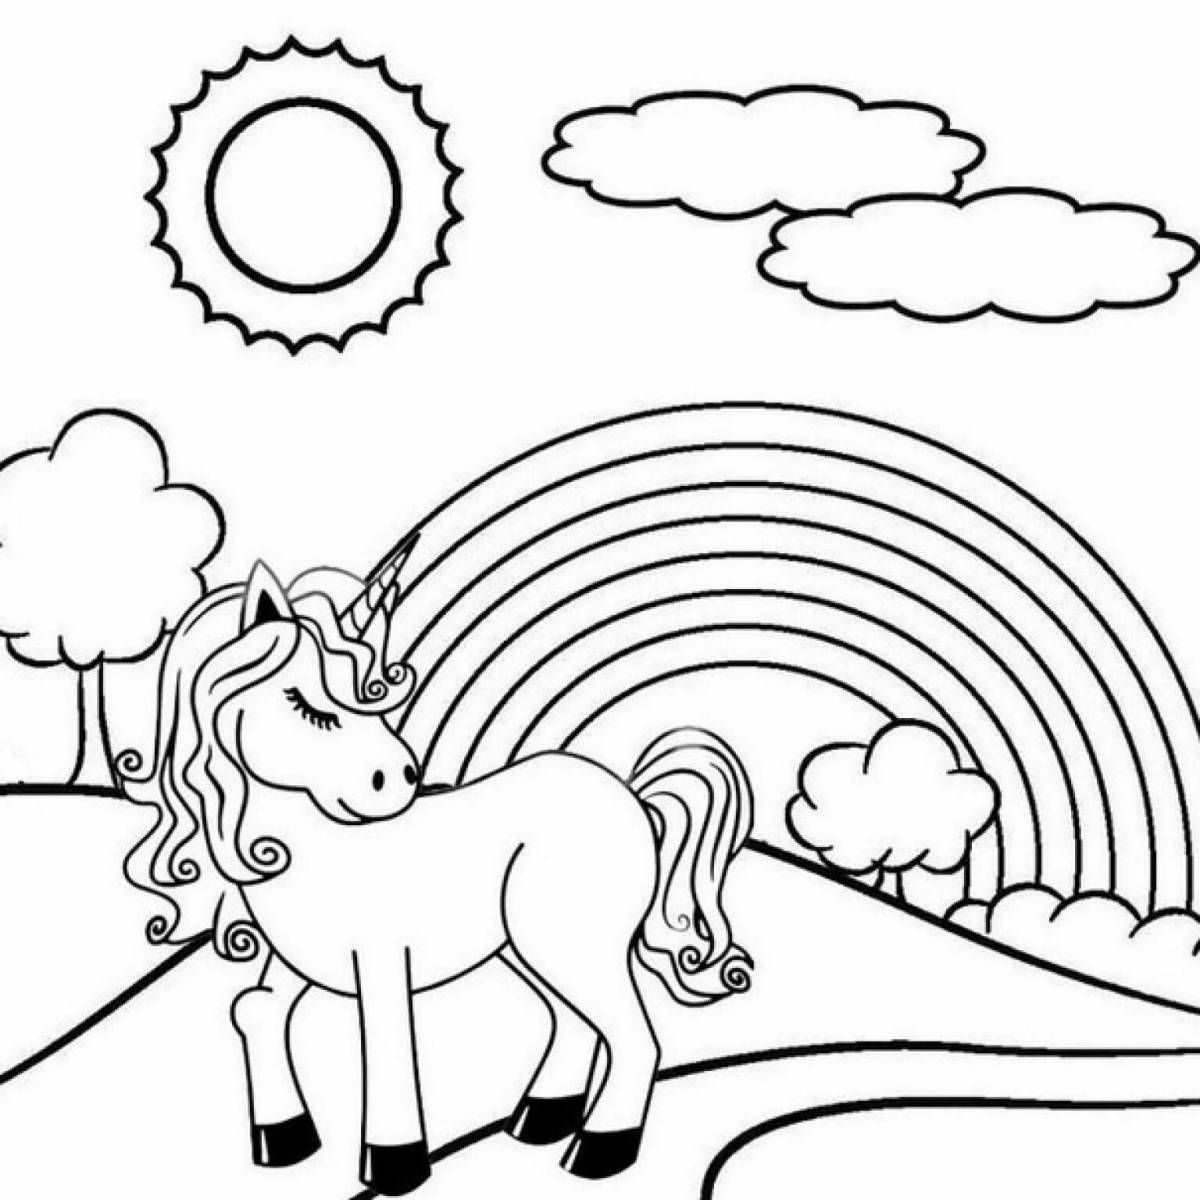 Sparkling rainbow friends coloring page